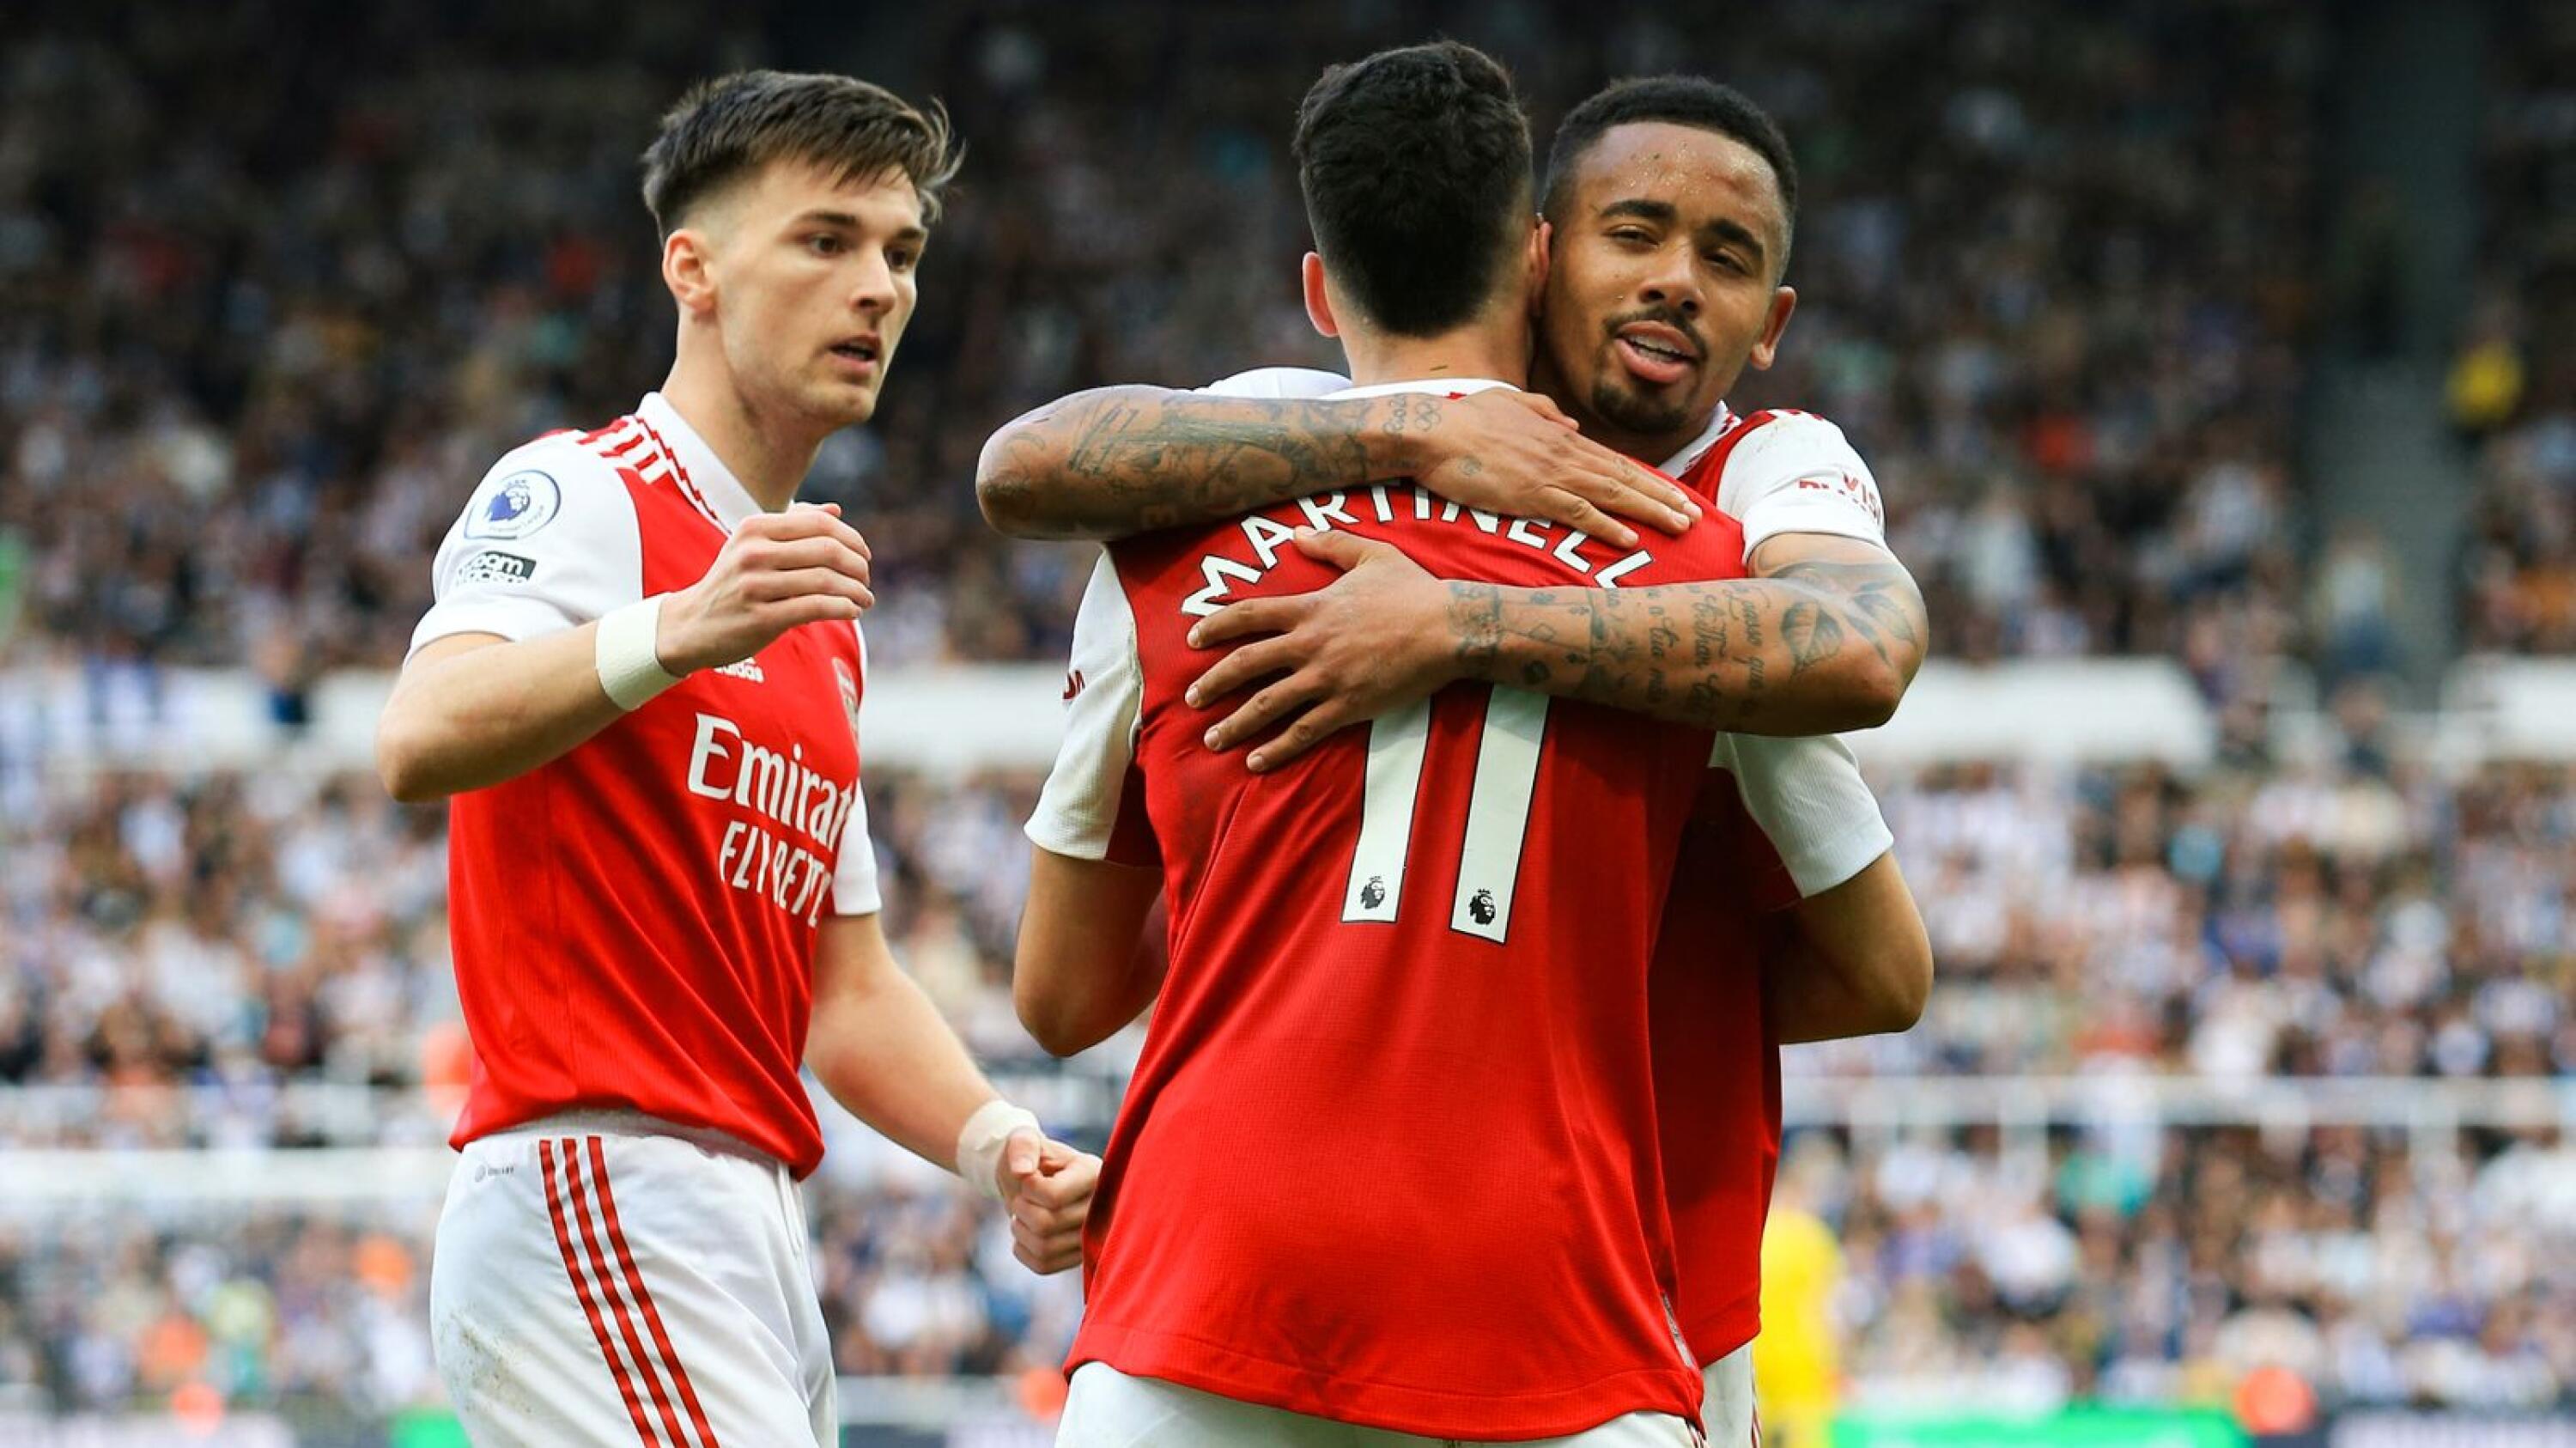 Arsenal's Brazilian winger Gabriel Martinelli (centre) is congratulated by Gabriel Jesus (right) after his side go 2-0 up against Newcastle United at St James' Park in Newcastle on Sunday